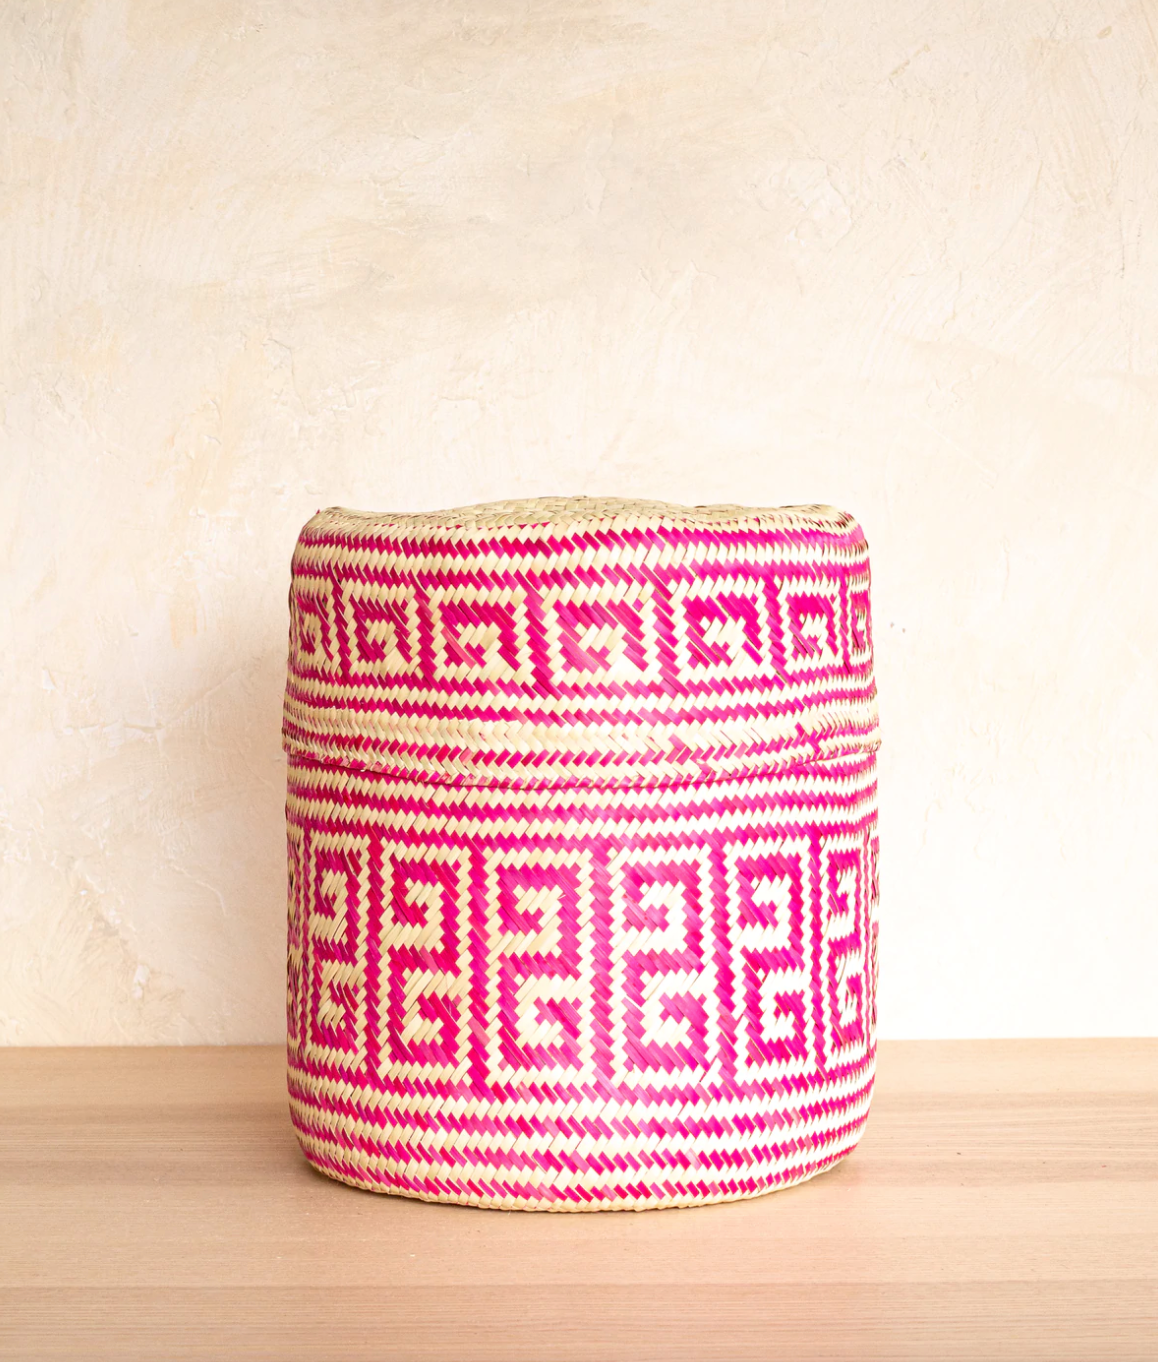 Large pink and nude patterned basket